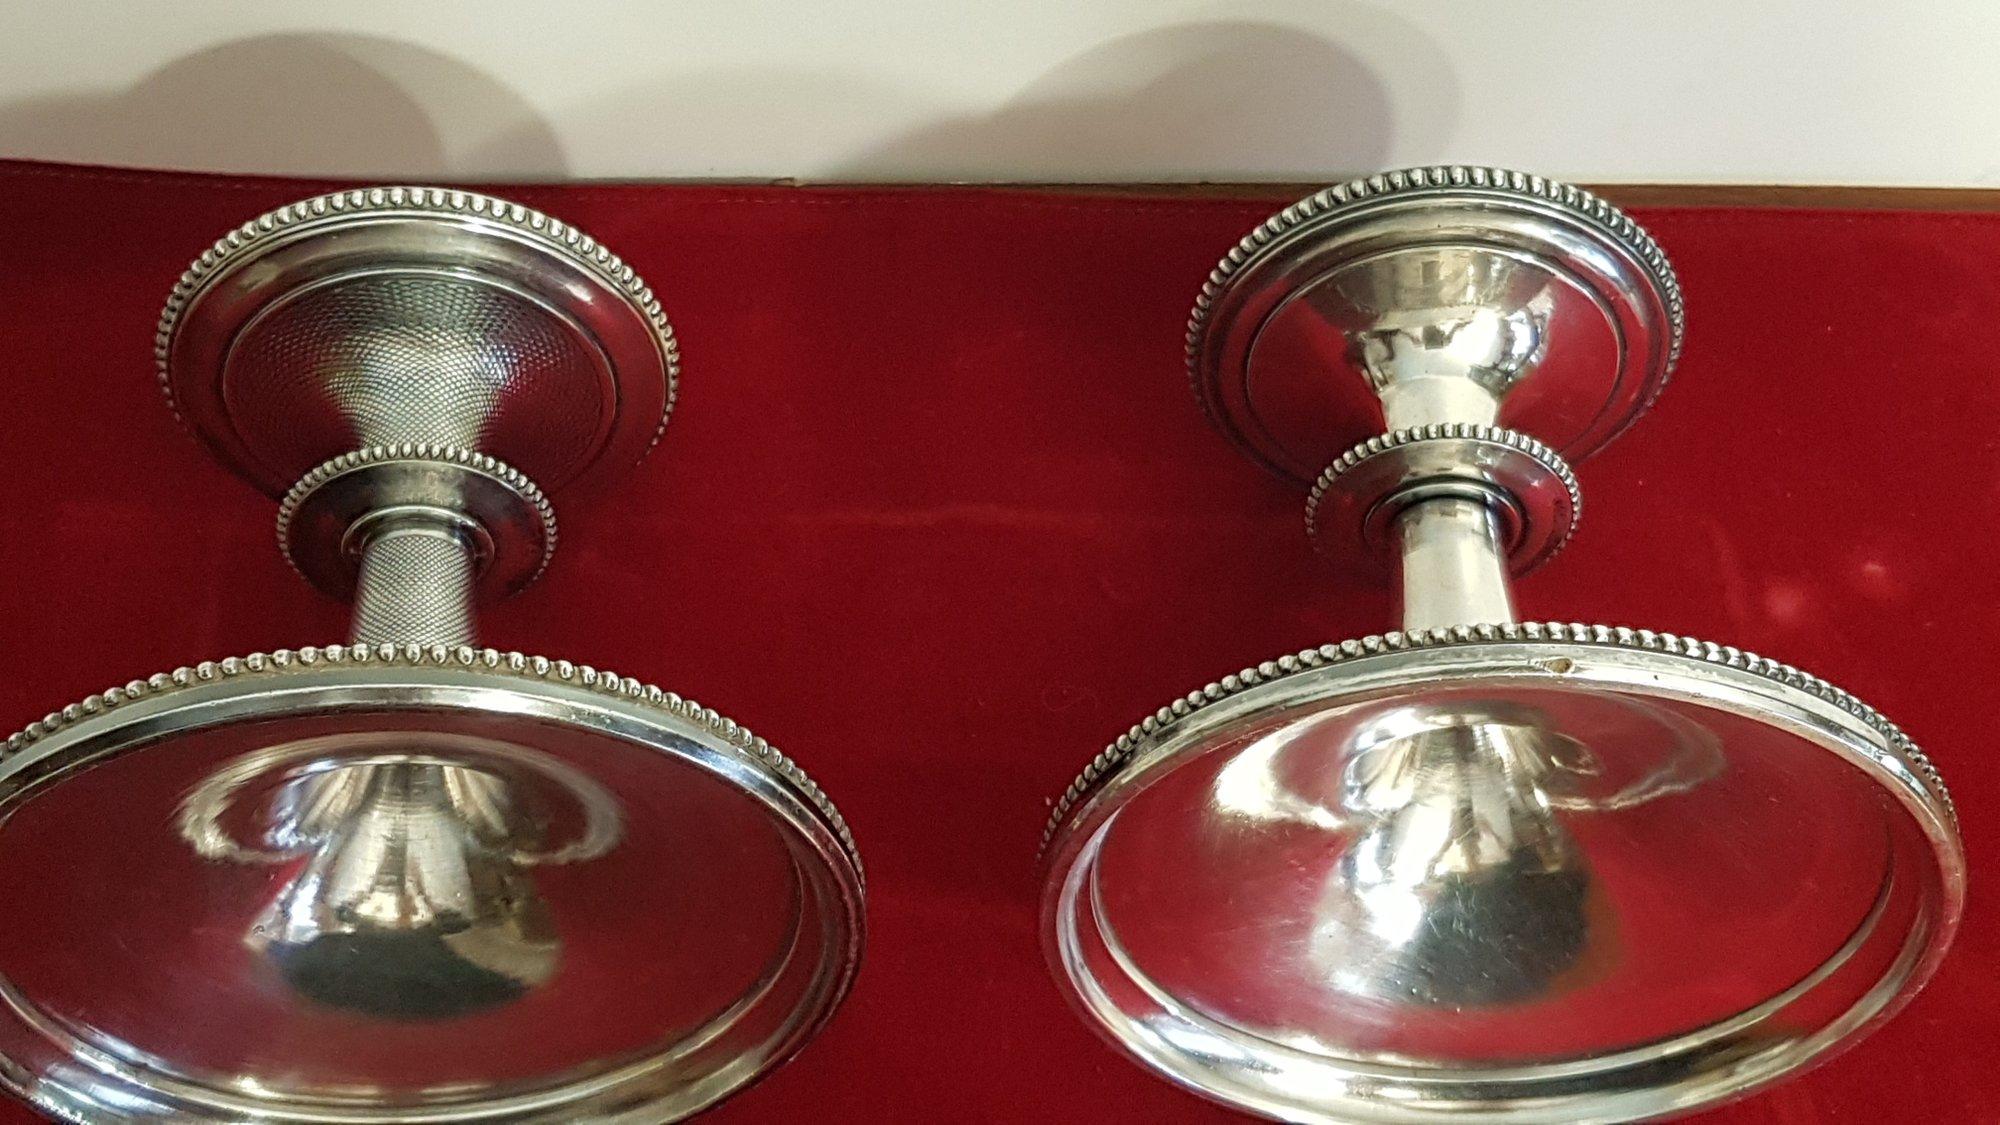 These rare Christofle Art Deco Candlestick holders from the 1950s are stunning vintage pieces that will make a wonderful addition to any collection. Each candle holder stands at 13 cm tall and is beautifully crafted from silver plate, reflecting the